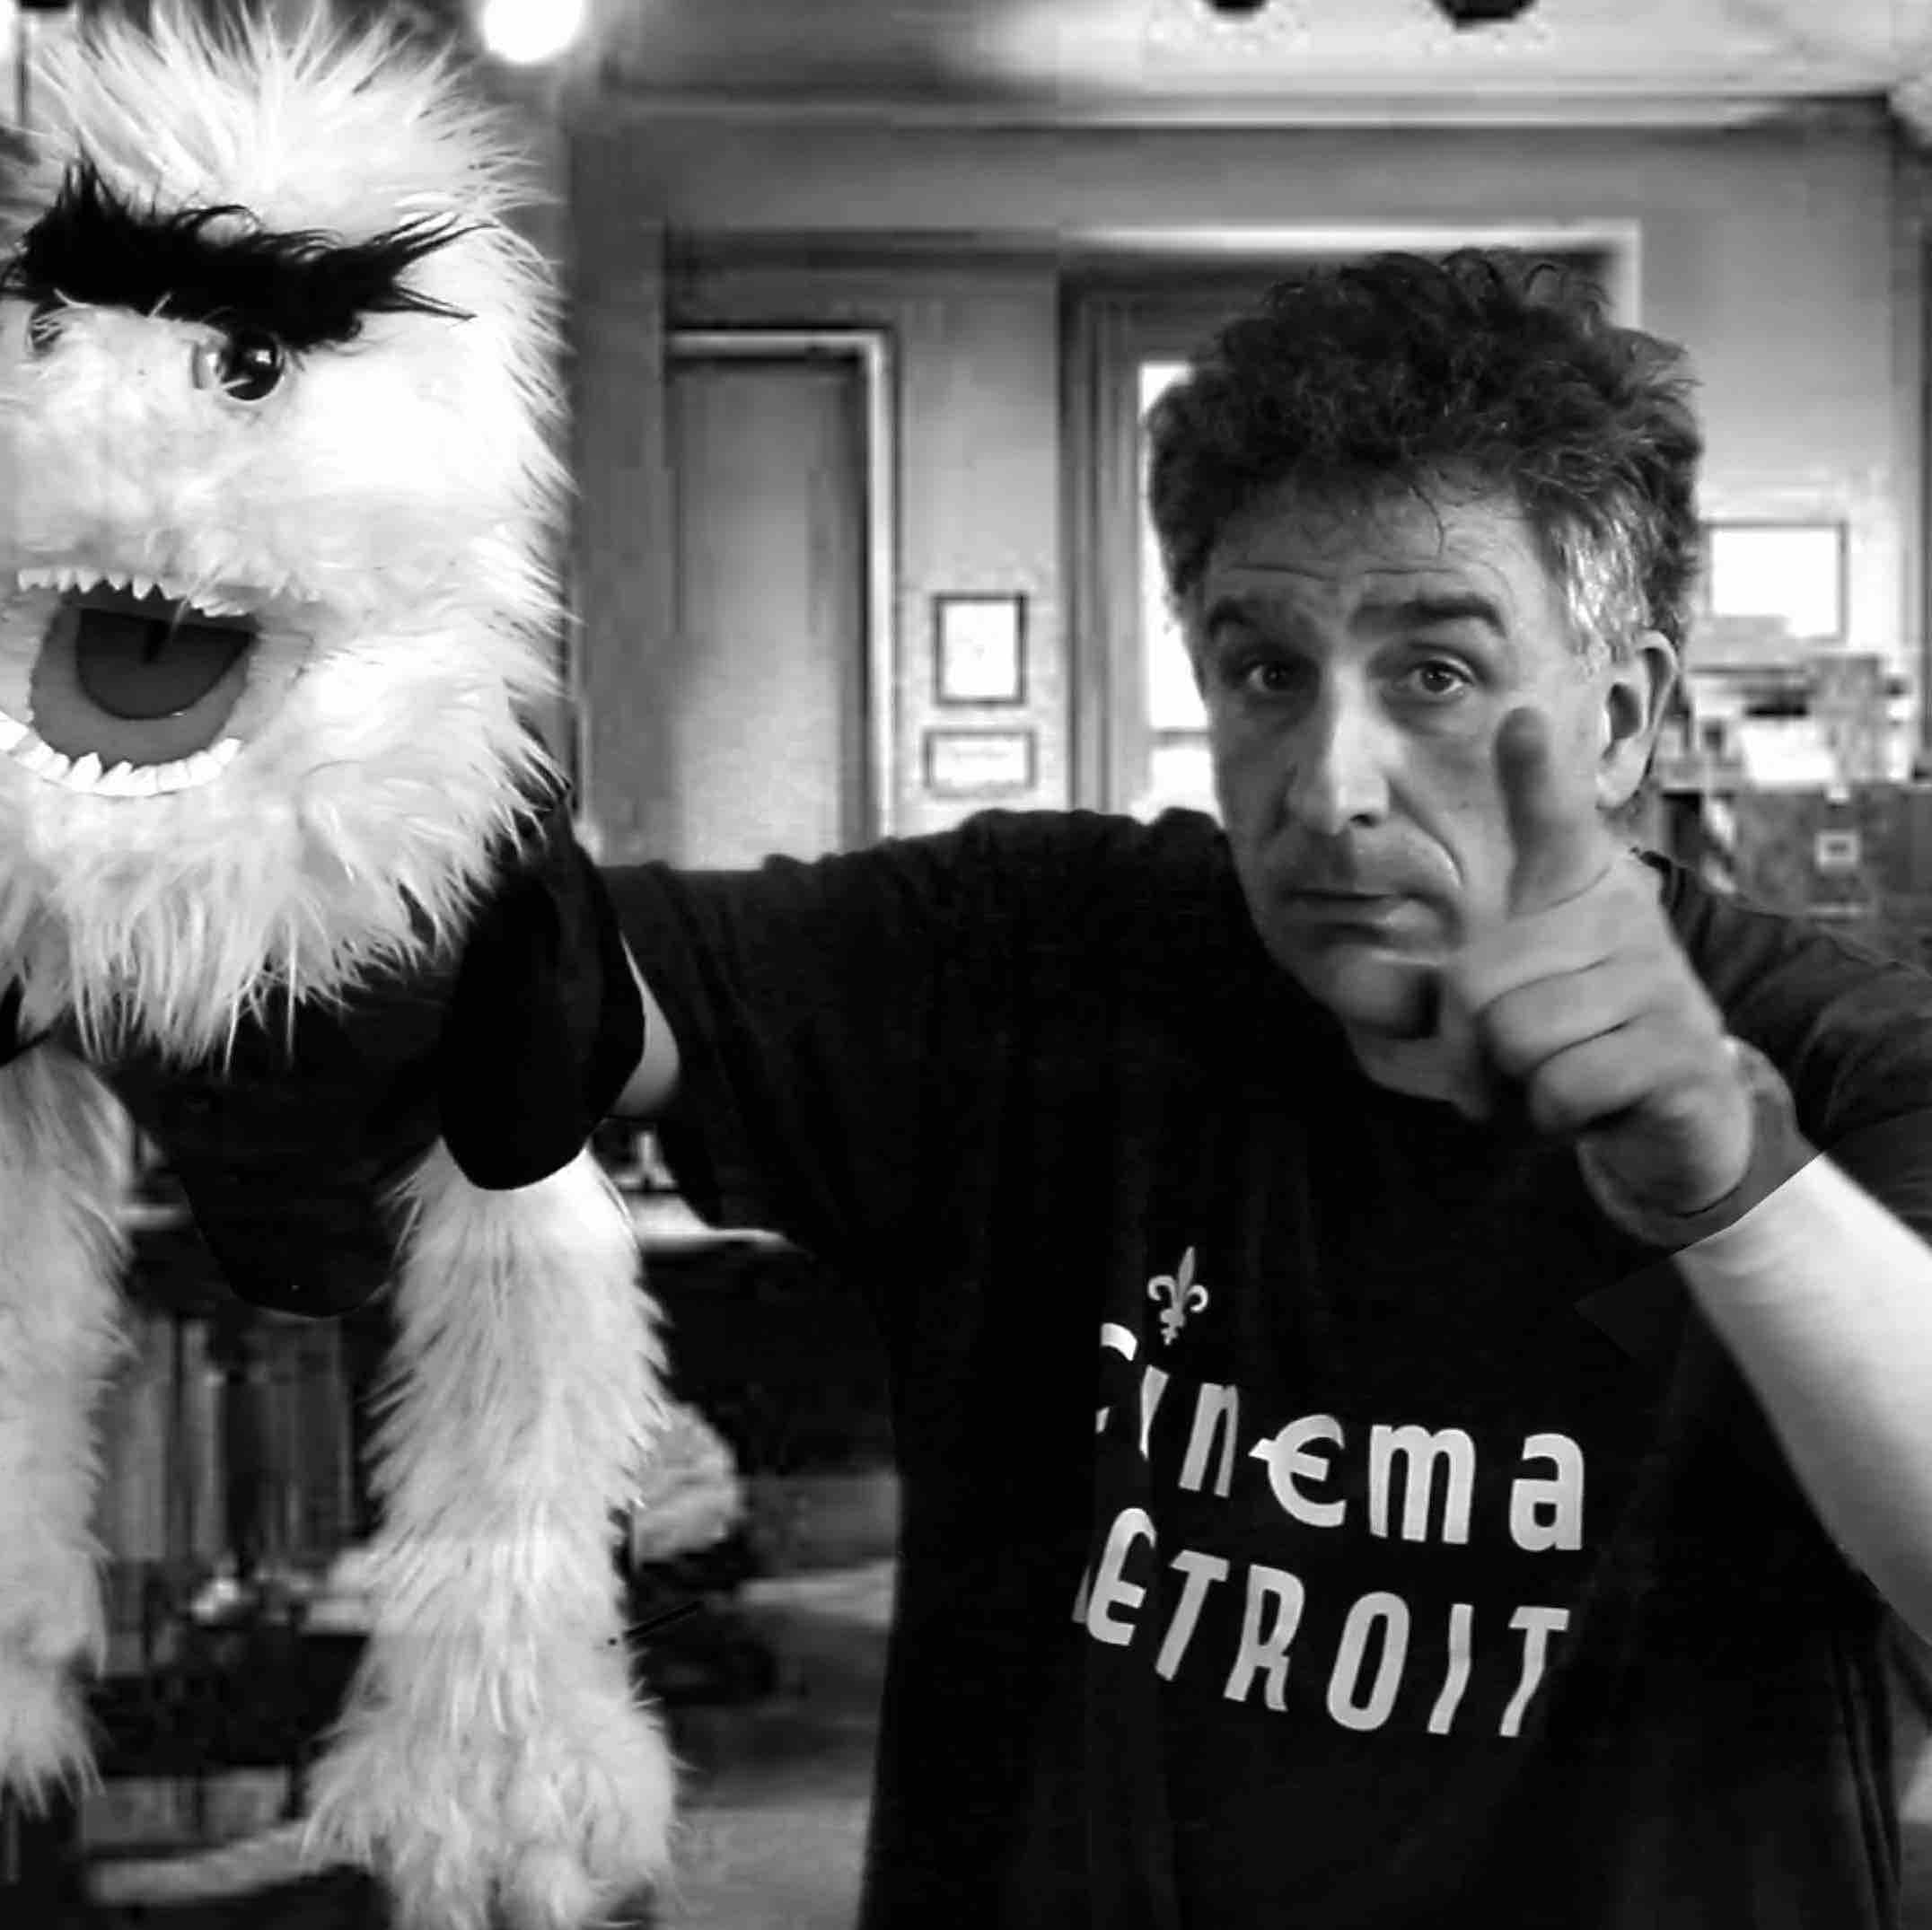 A medium black & white shot of a man pointing a finger at camera while holding a large fuzzy puppet in the other hand